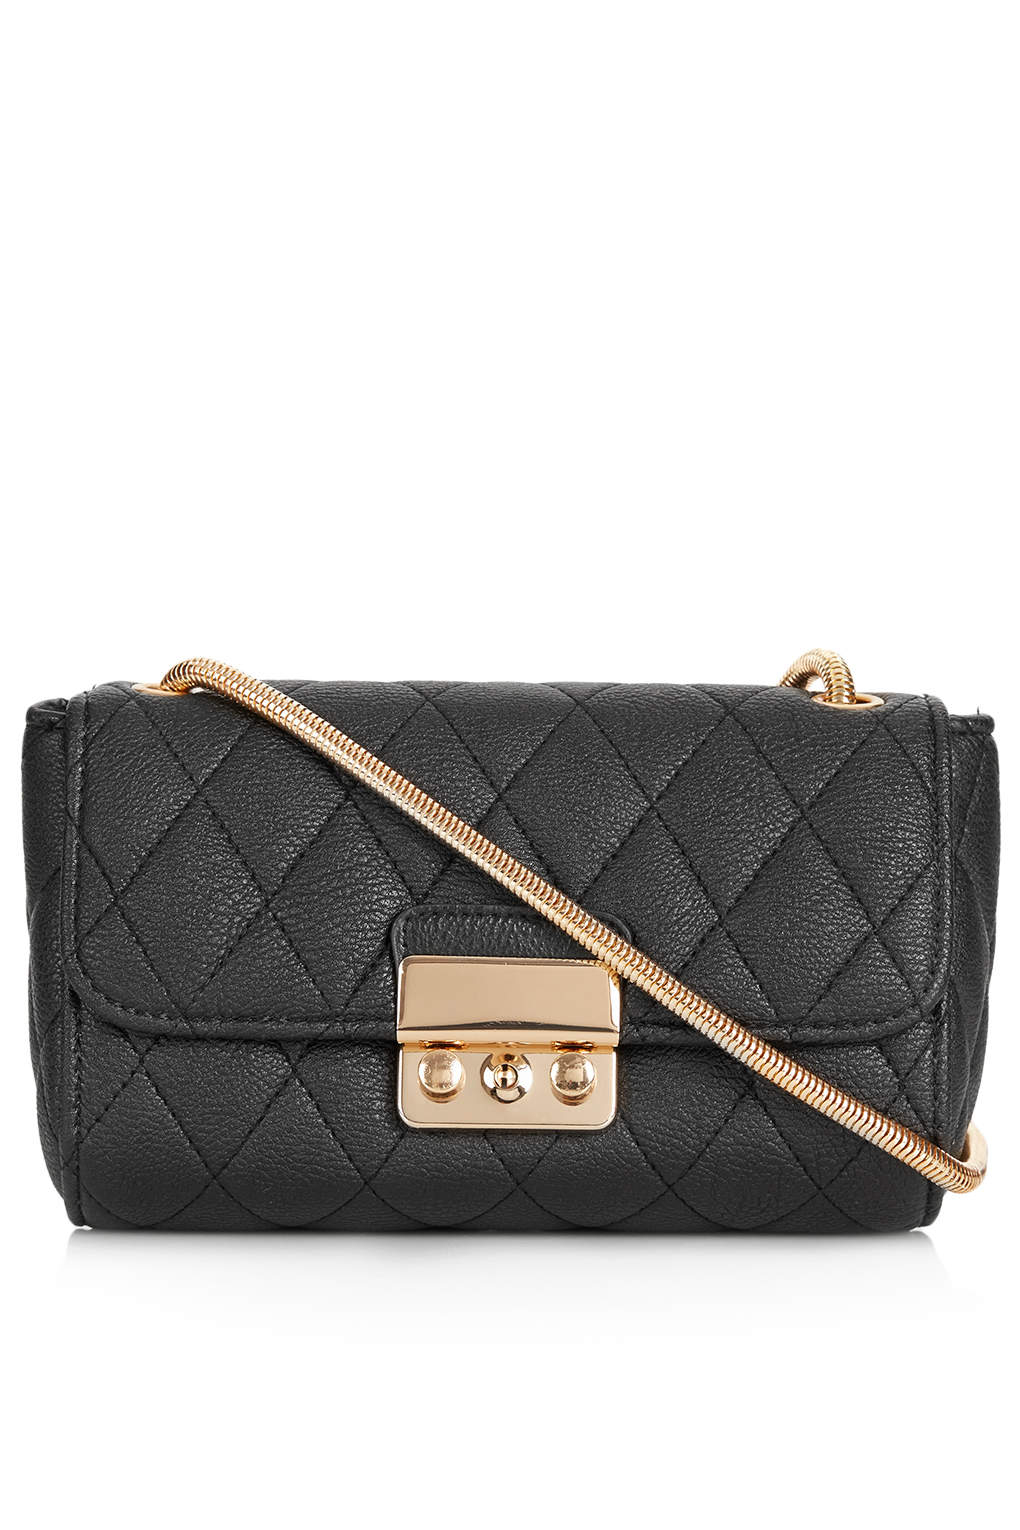 TOPSHOP Quilted Crossbody Bag in Black - Lyst